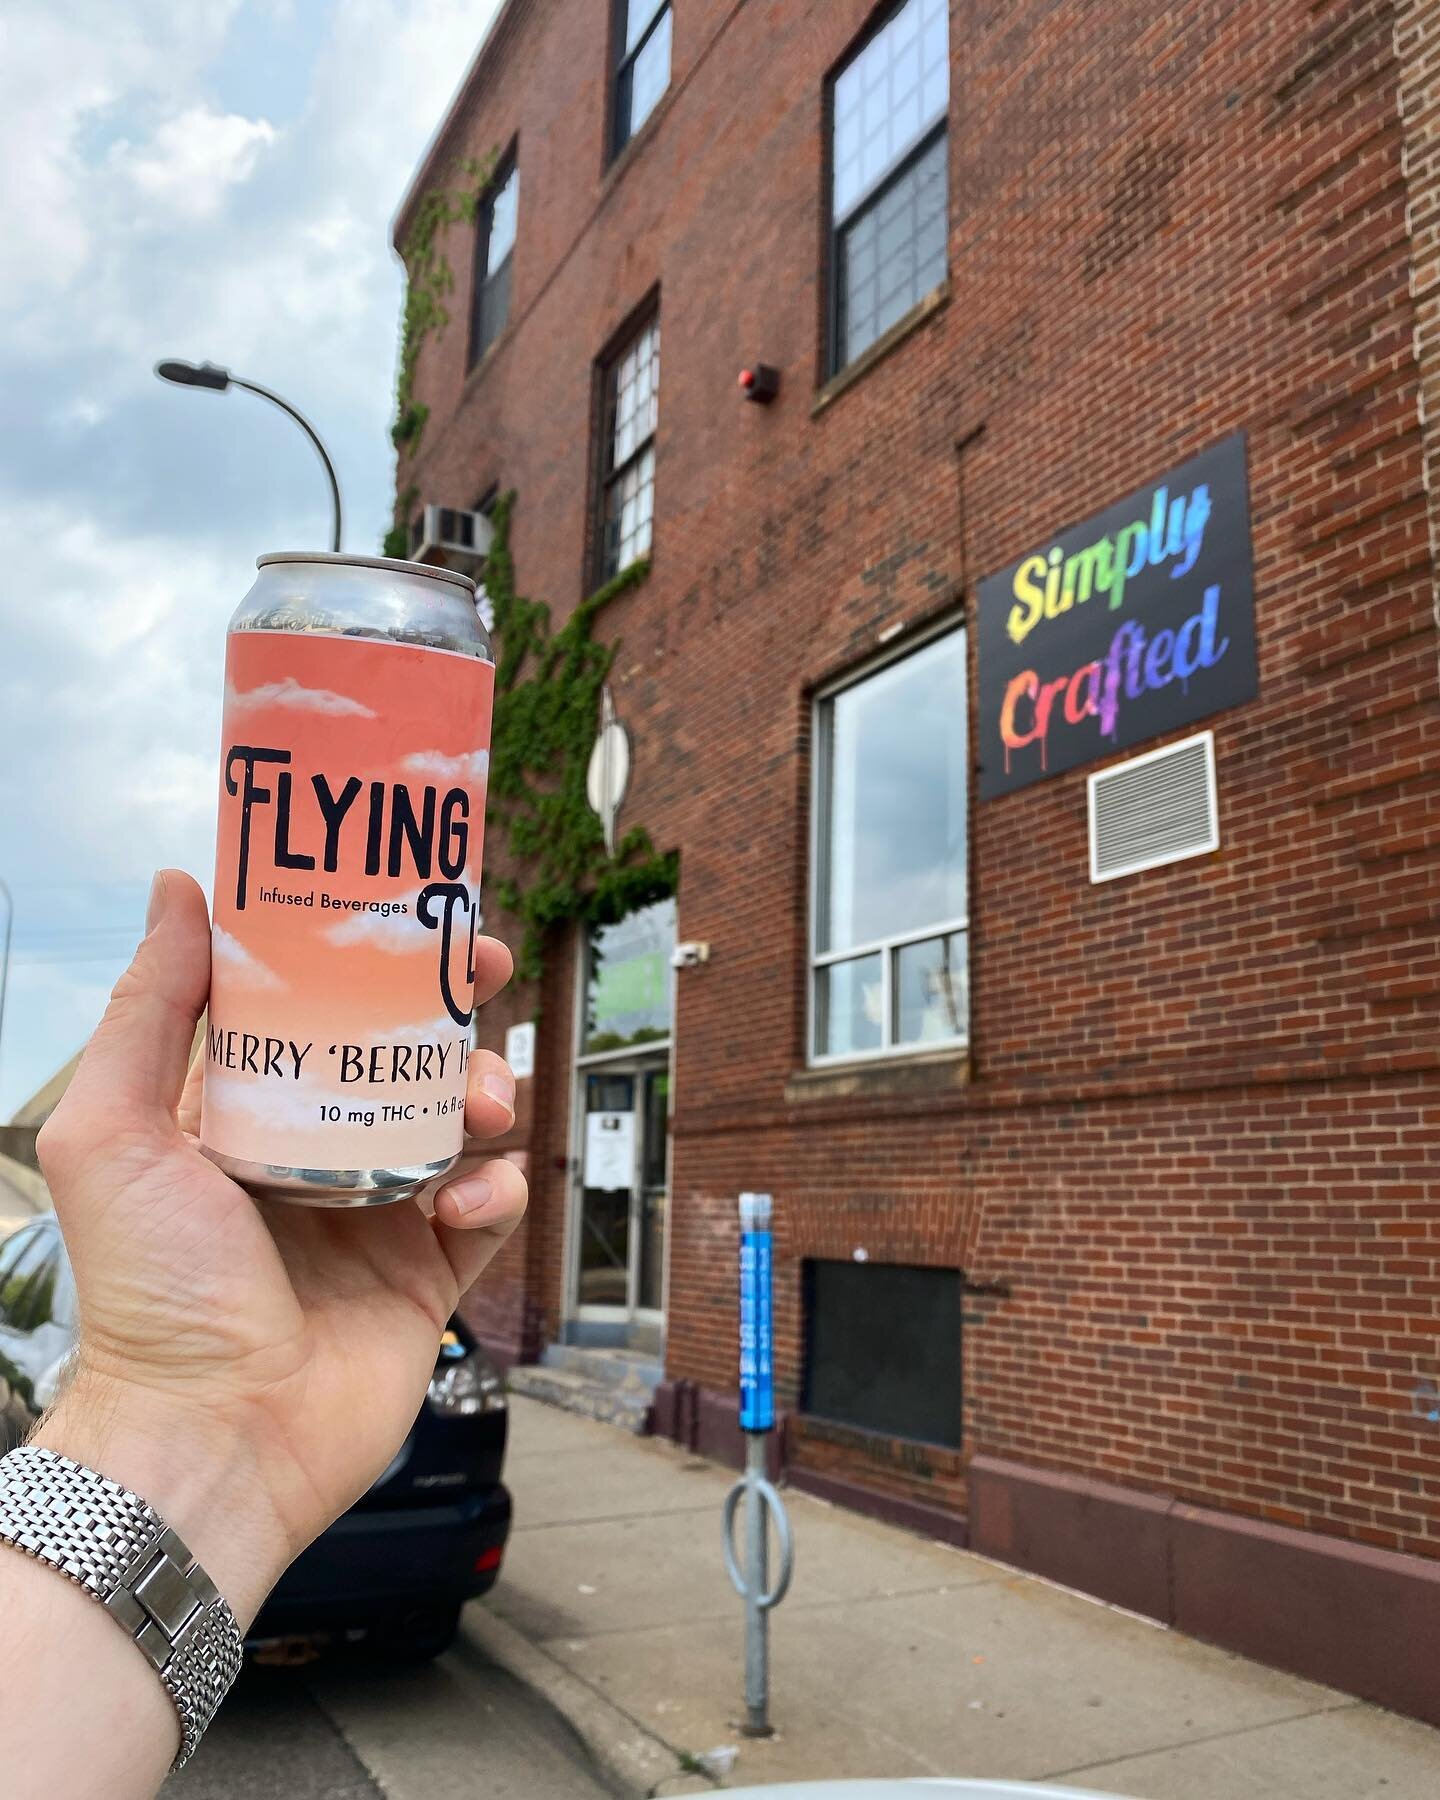 Flying Cloud has come to NE! Go check out @simplycraftedcbd on Central and SE 8th Street for all your cloud-9-in-a-can needs🍃✌️ 

#neminneapolis #minnesota #minneapolis